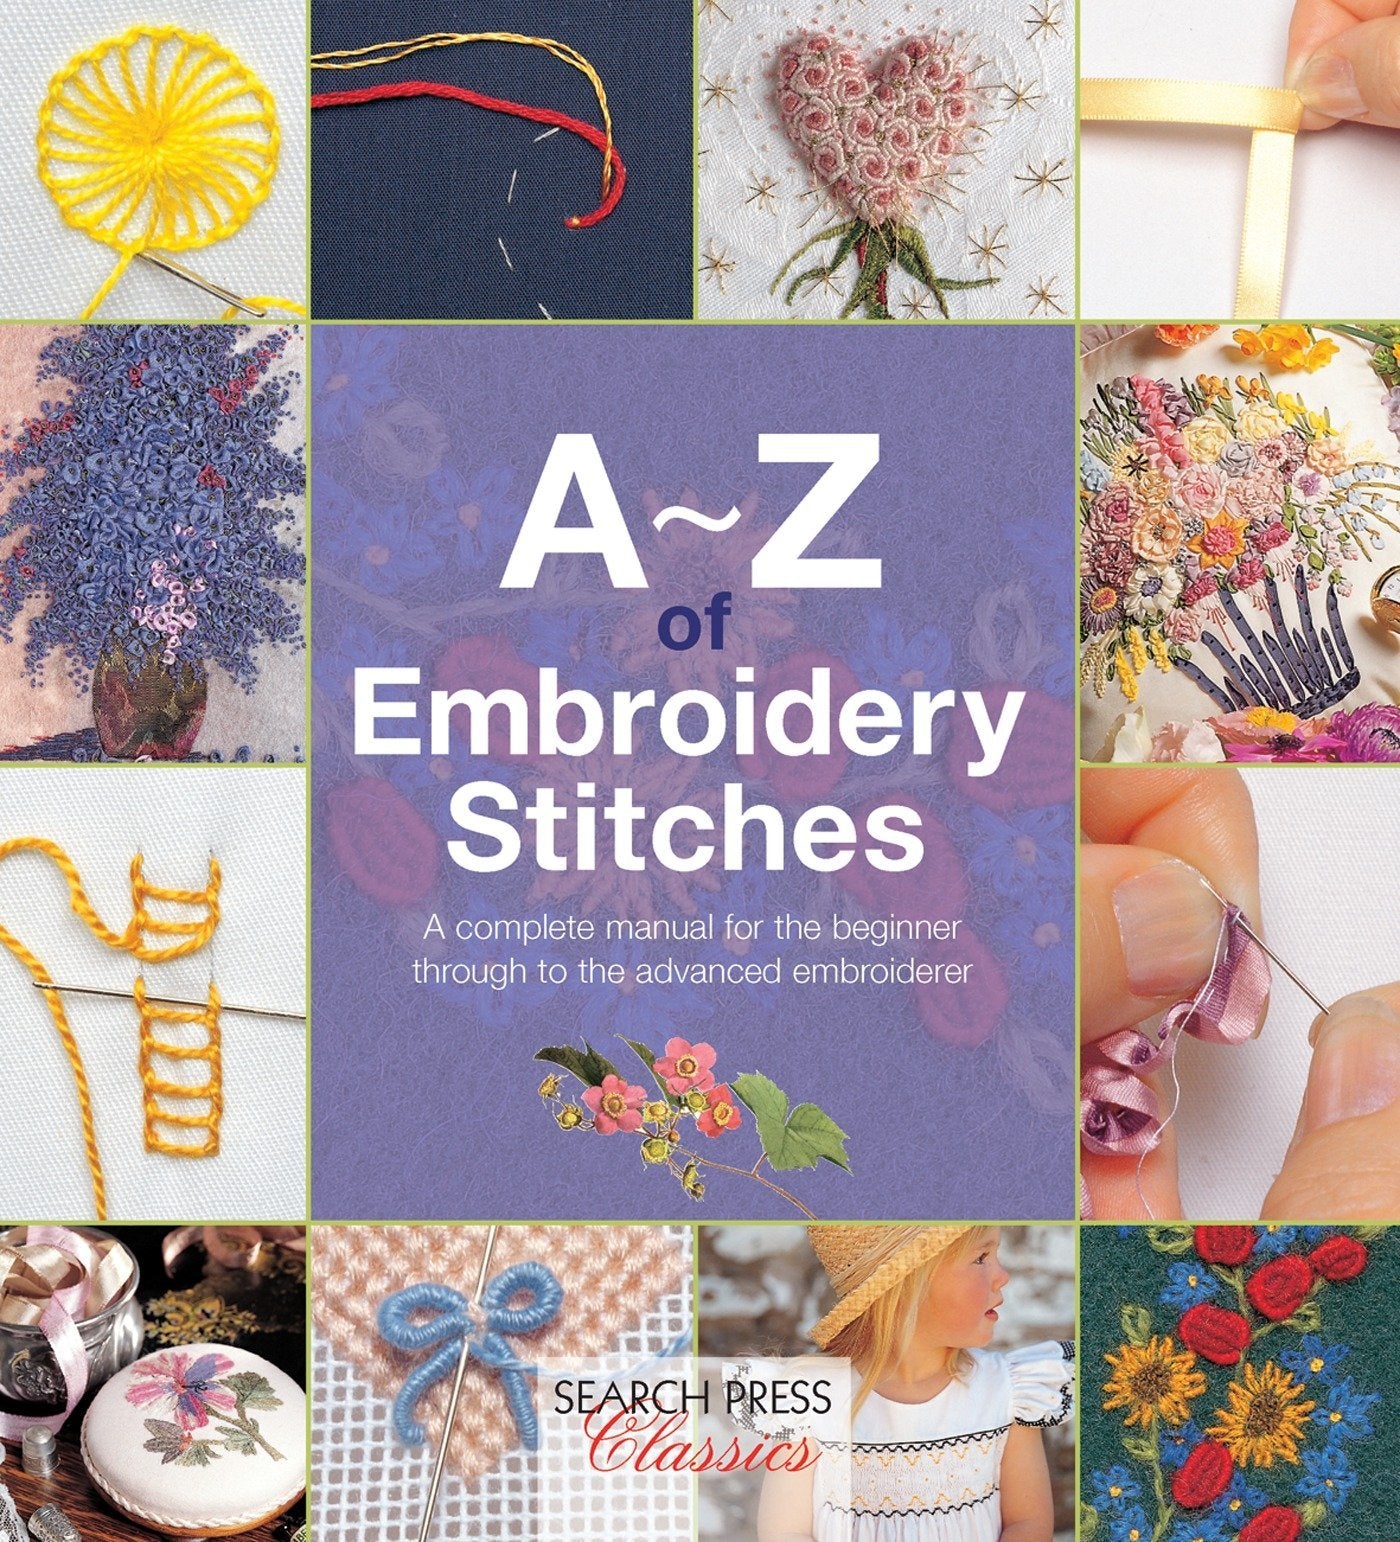 A~Z of Embroidery Stitches